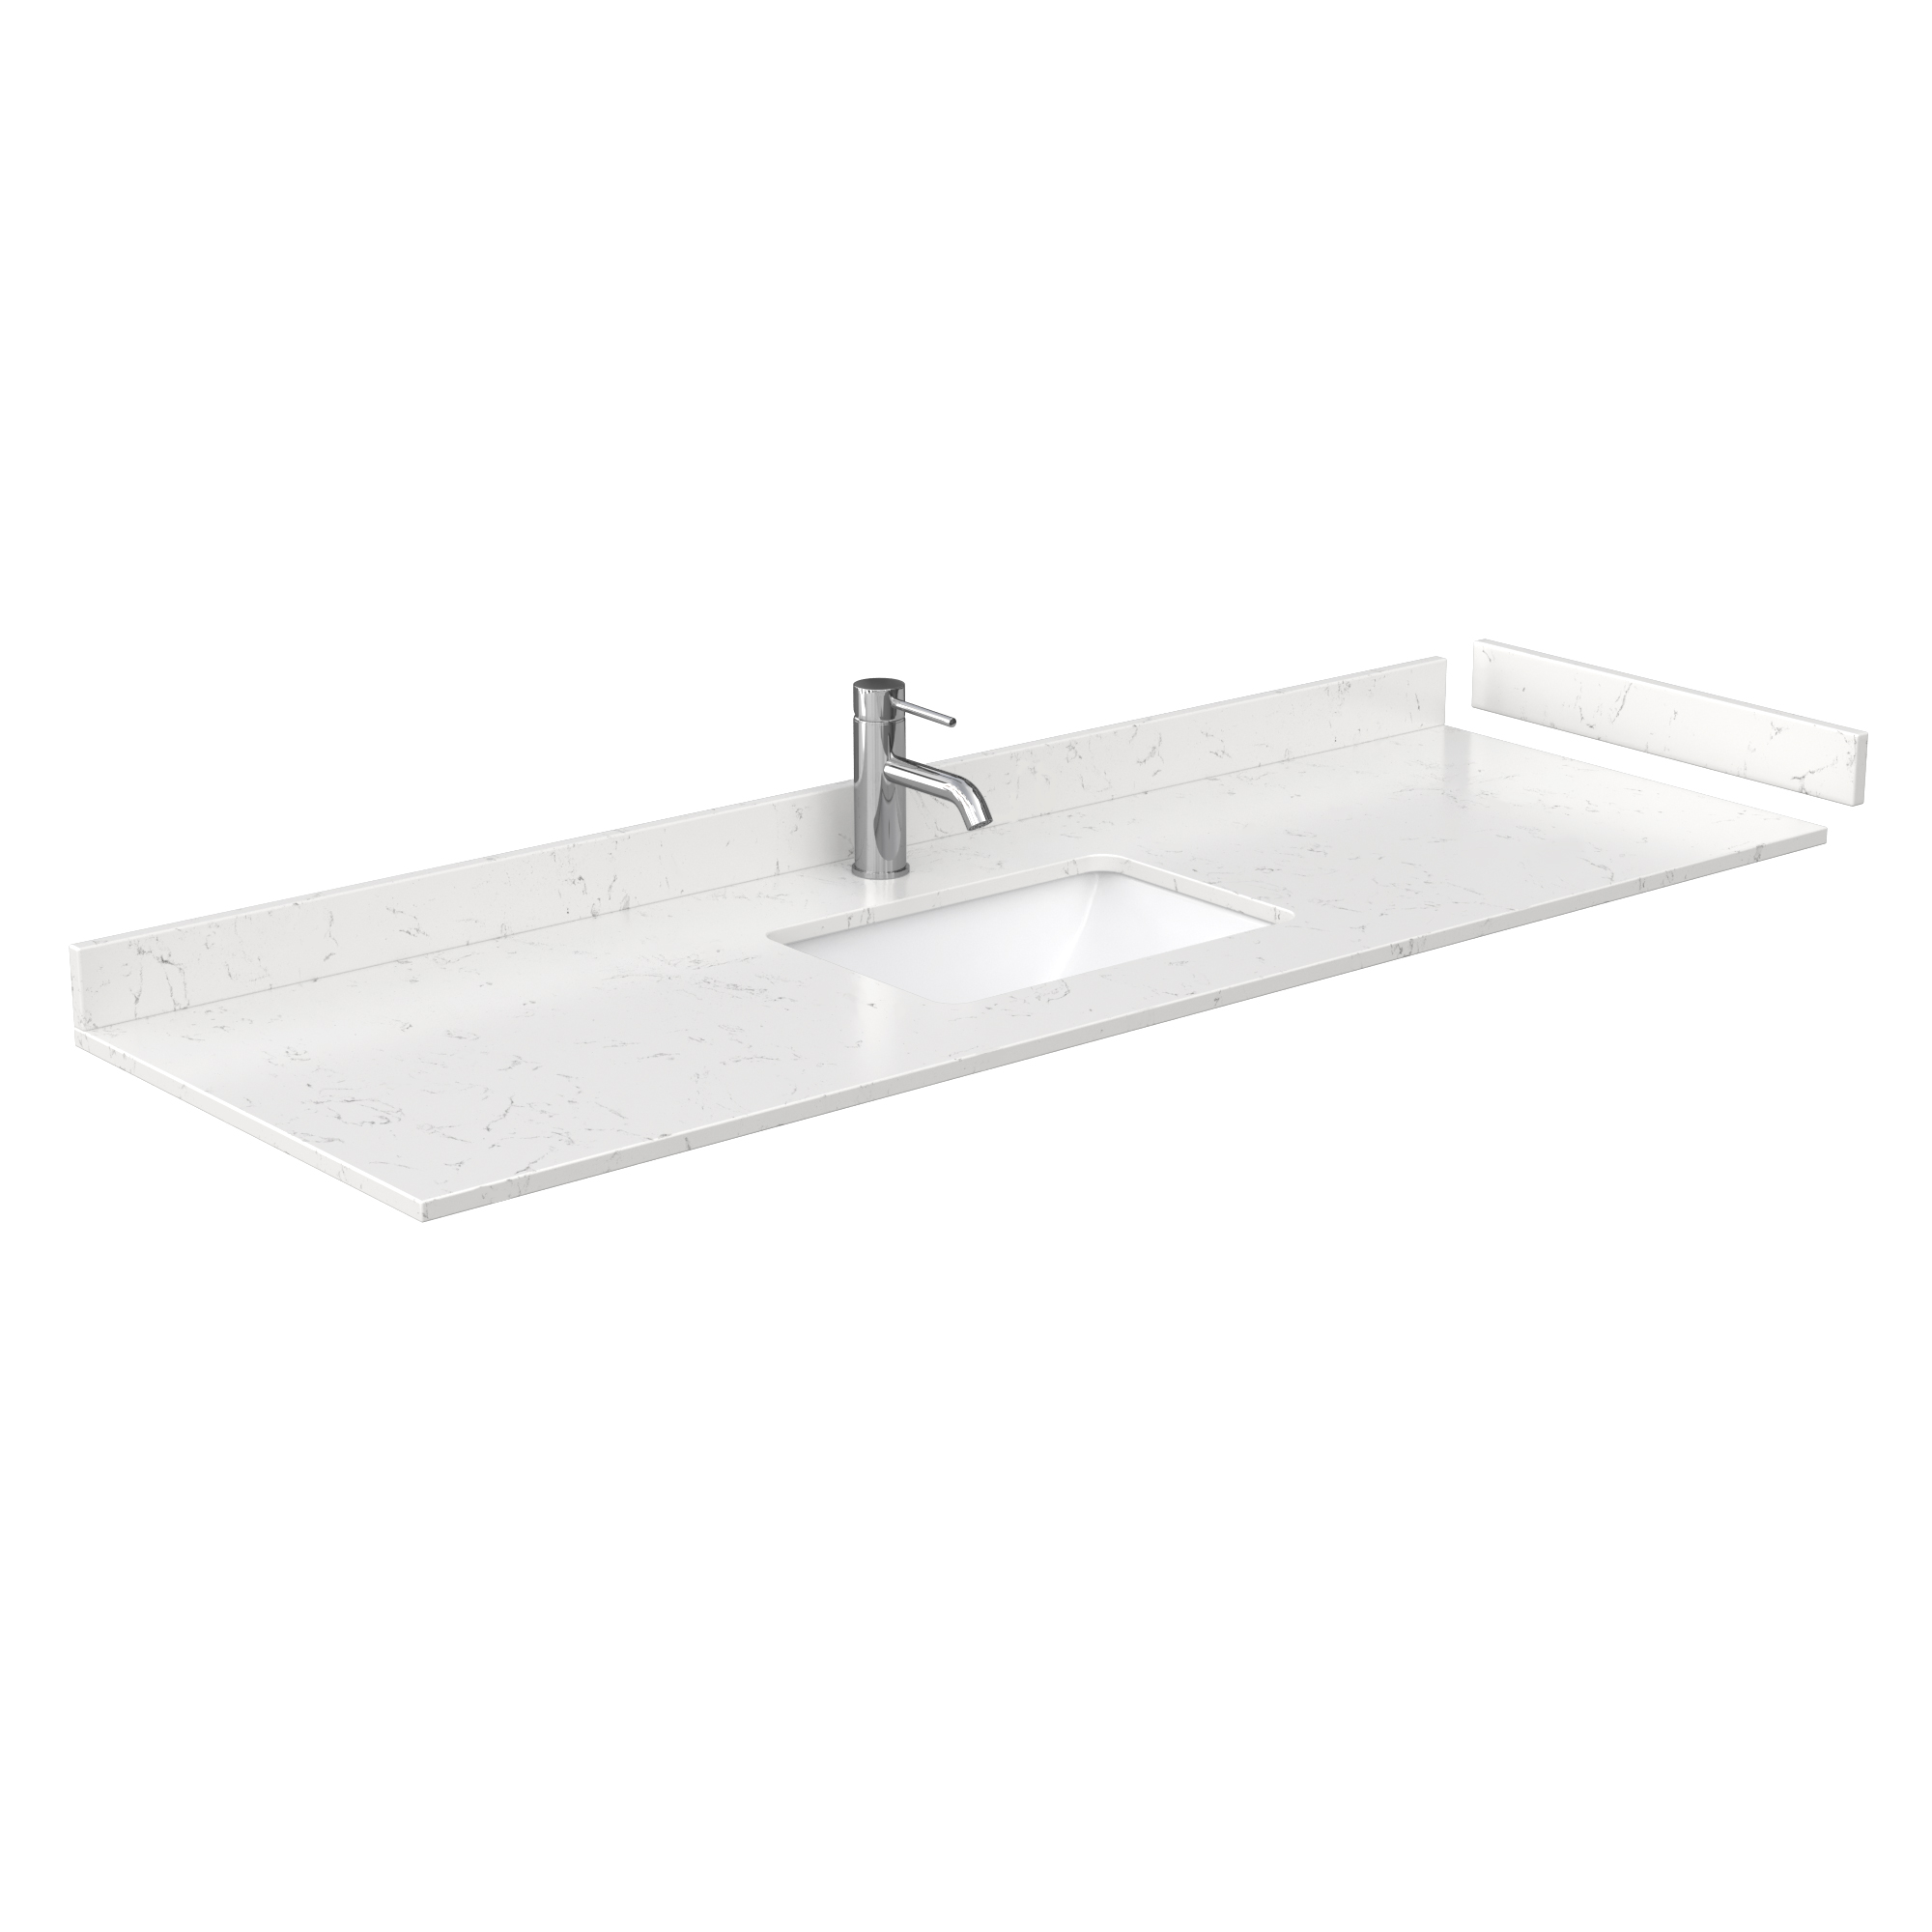 66" single countertop - light-vein carrara cultured marble with undermount square sink - includes backsplash and sidesplash